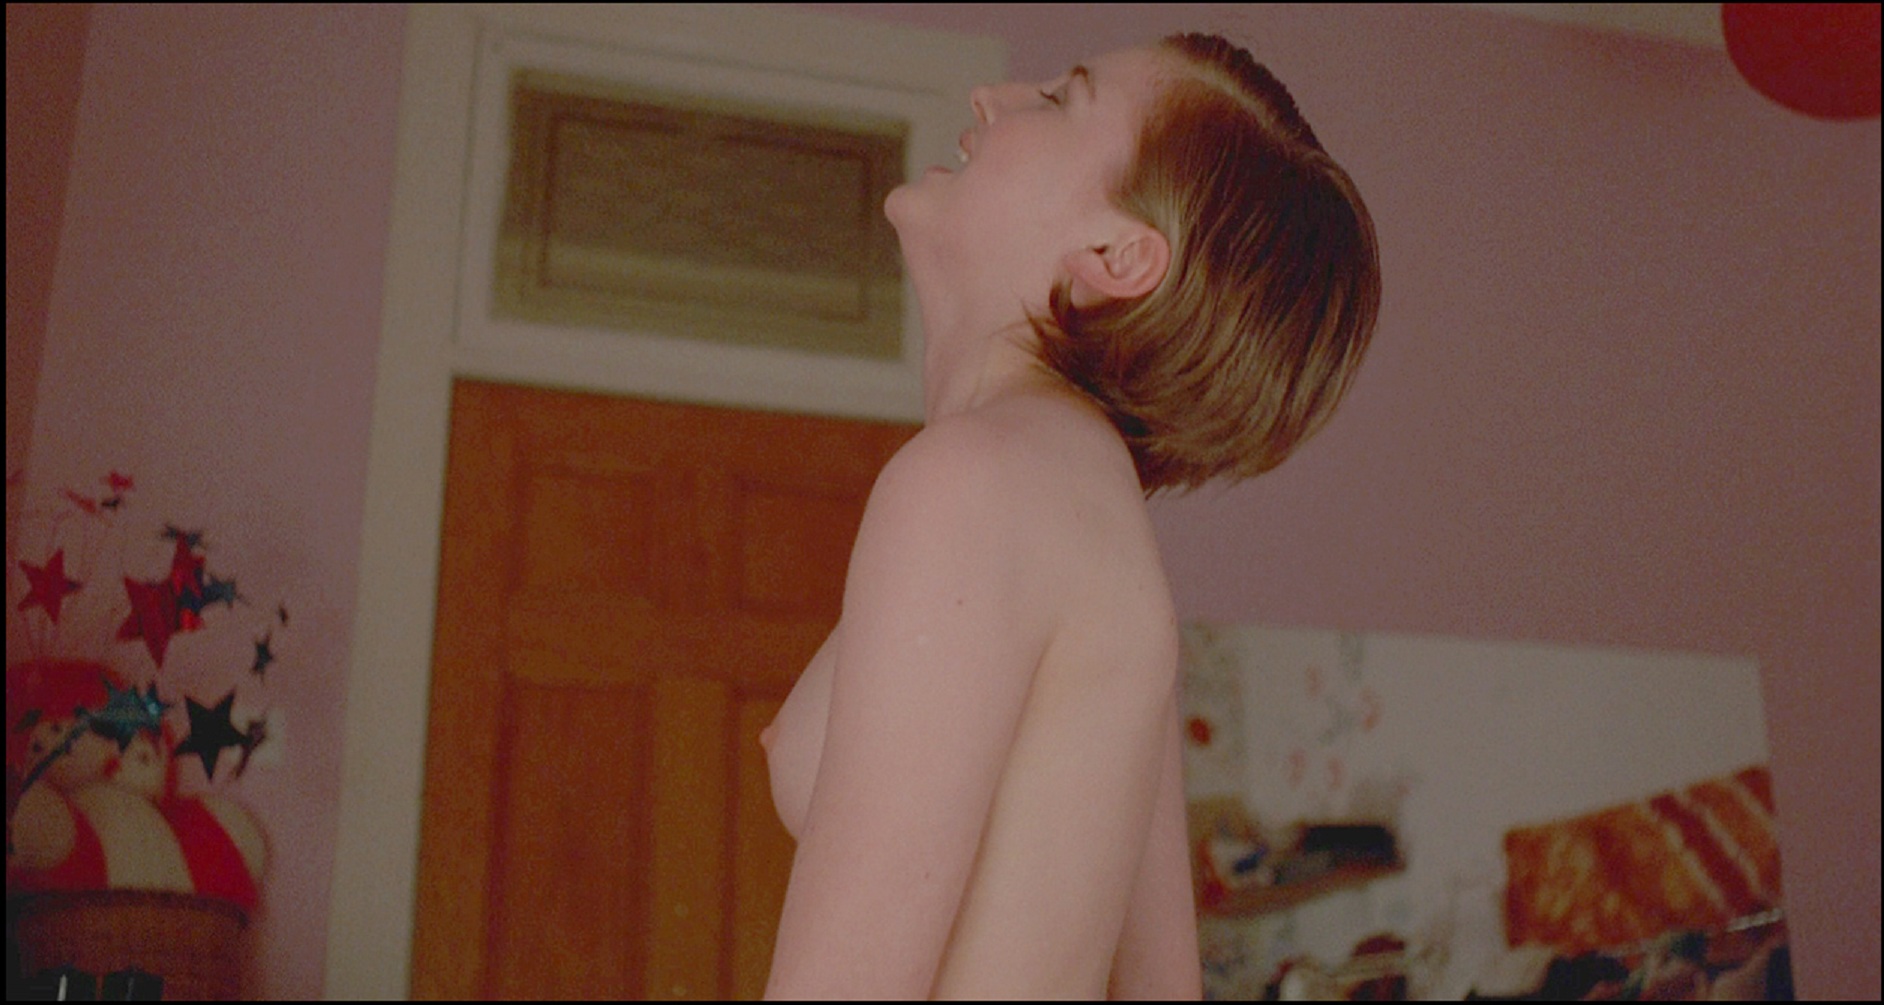 Kelly Macdonald Nue Dans Trainspotting Free Download Nude Photo Gallery